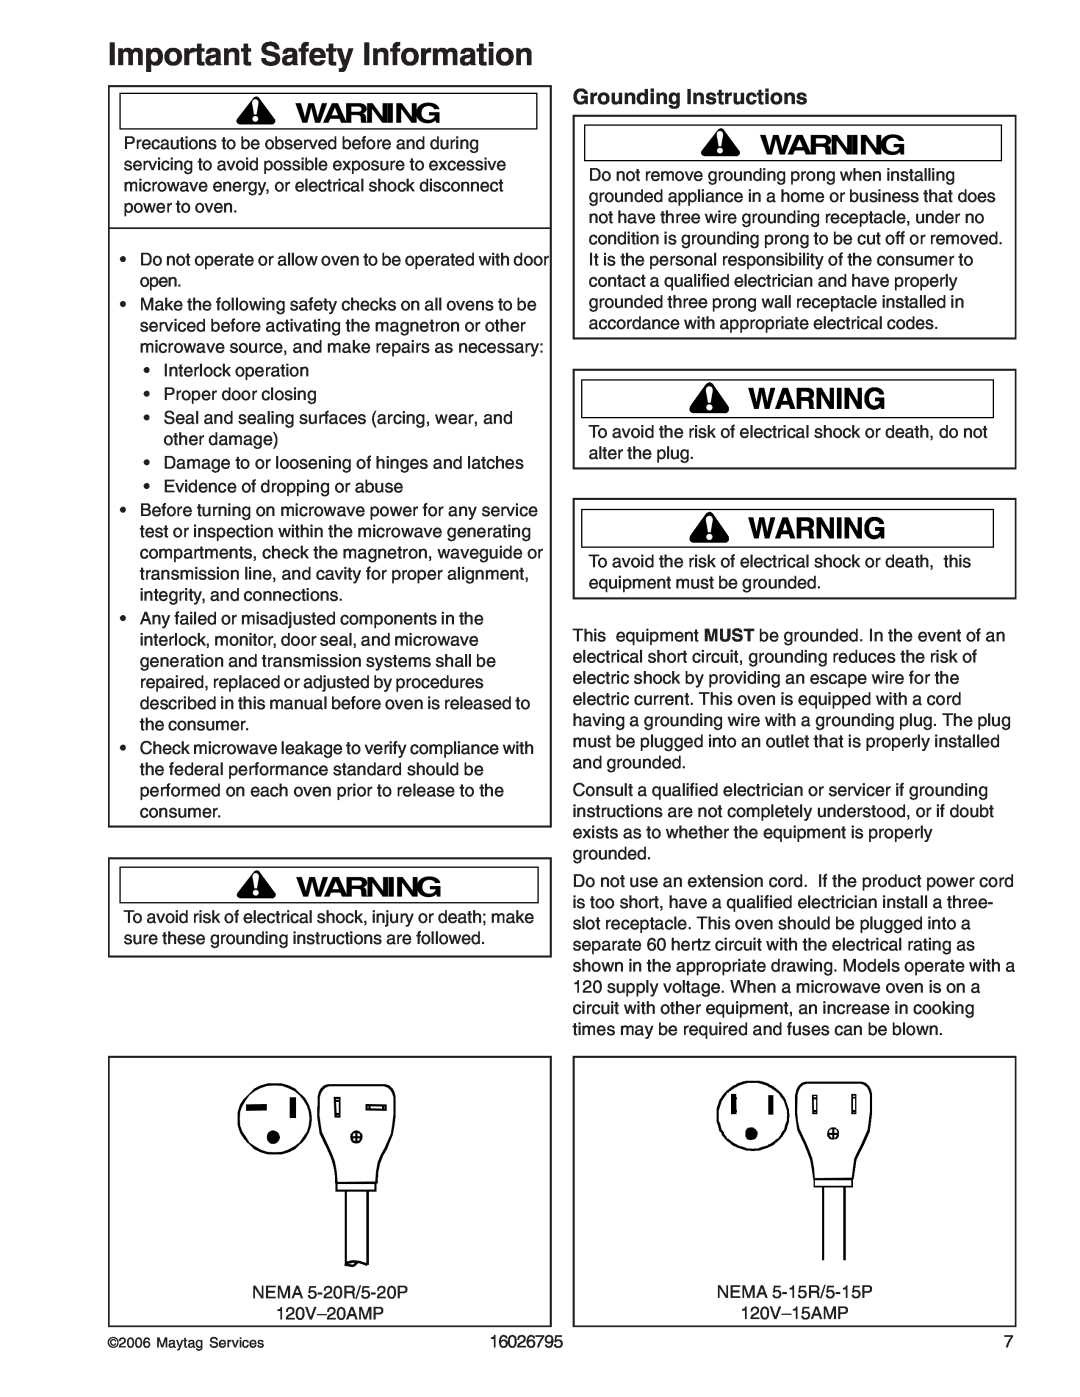 Maytag 1800 W - 2005 manual Grounding Instructions, Important Safety Information 